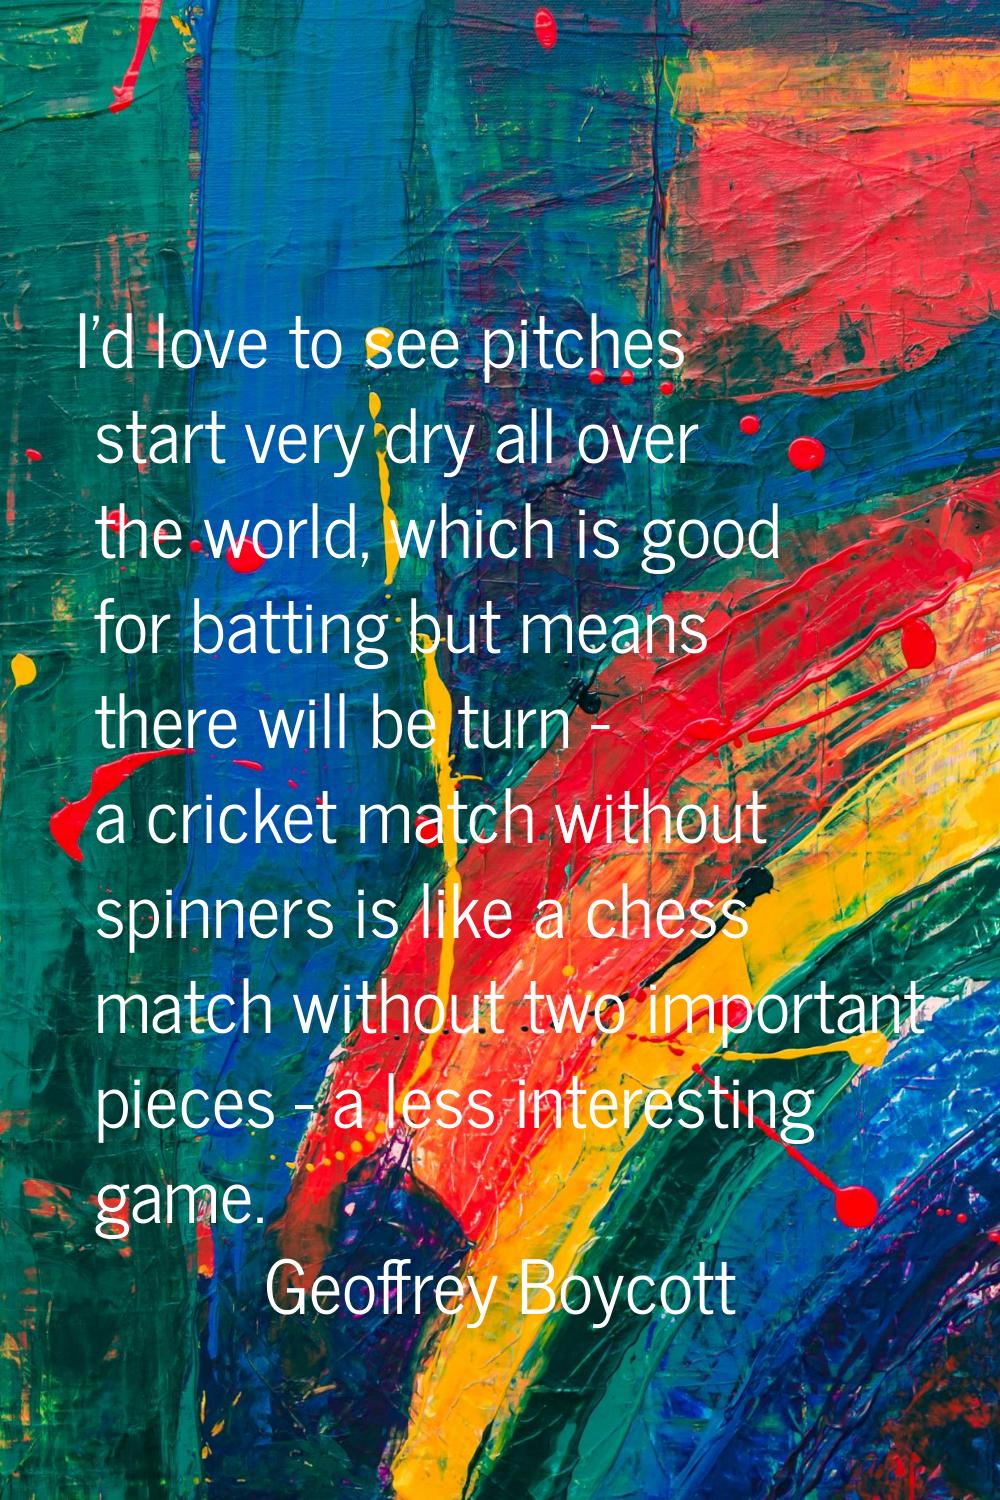 I'd love to see pitches start very dry all over the world, which is good for batting but means ther